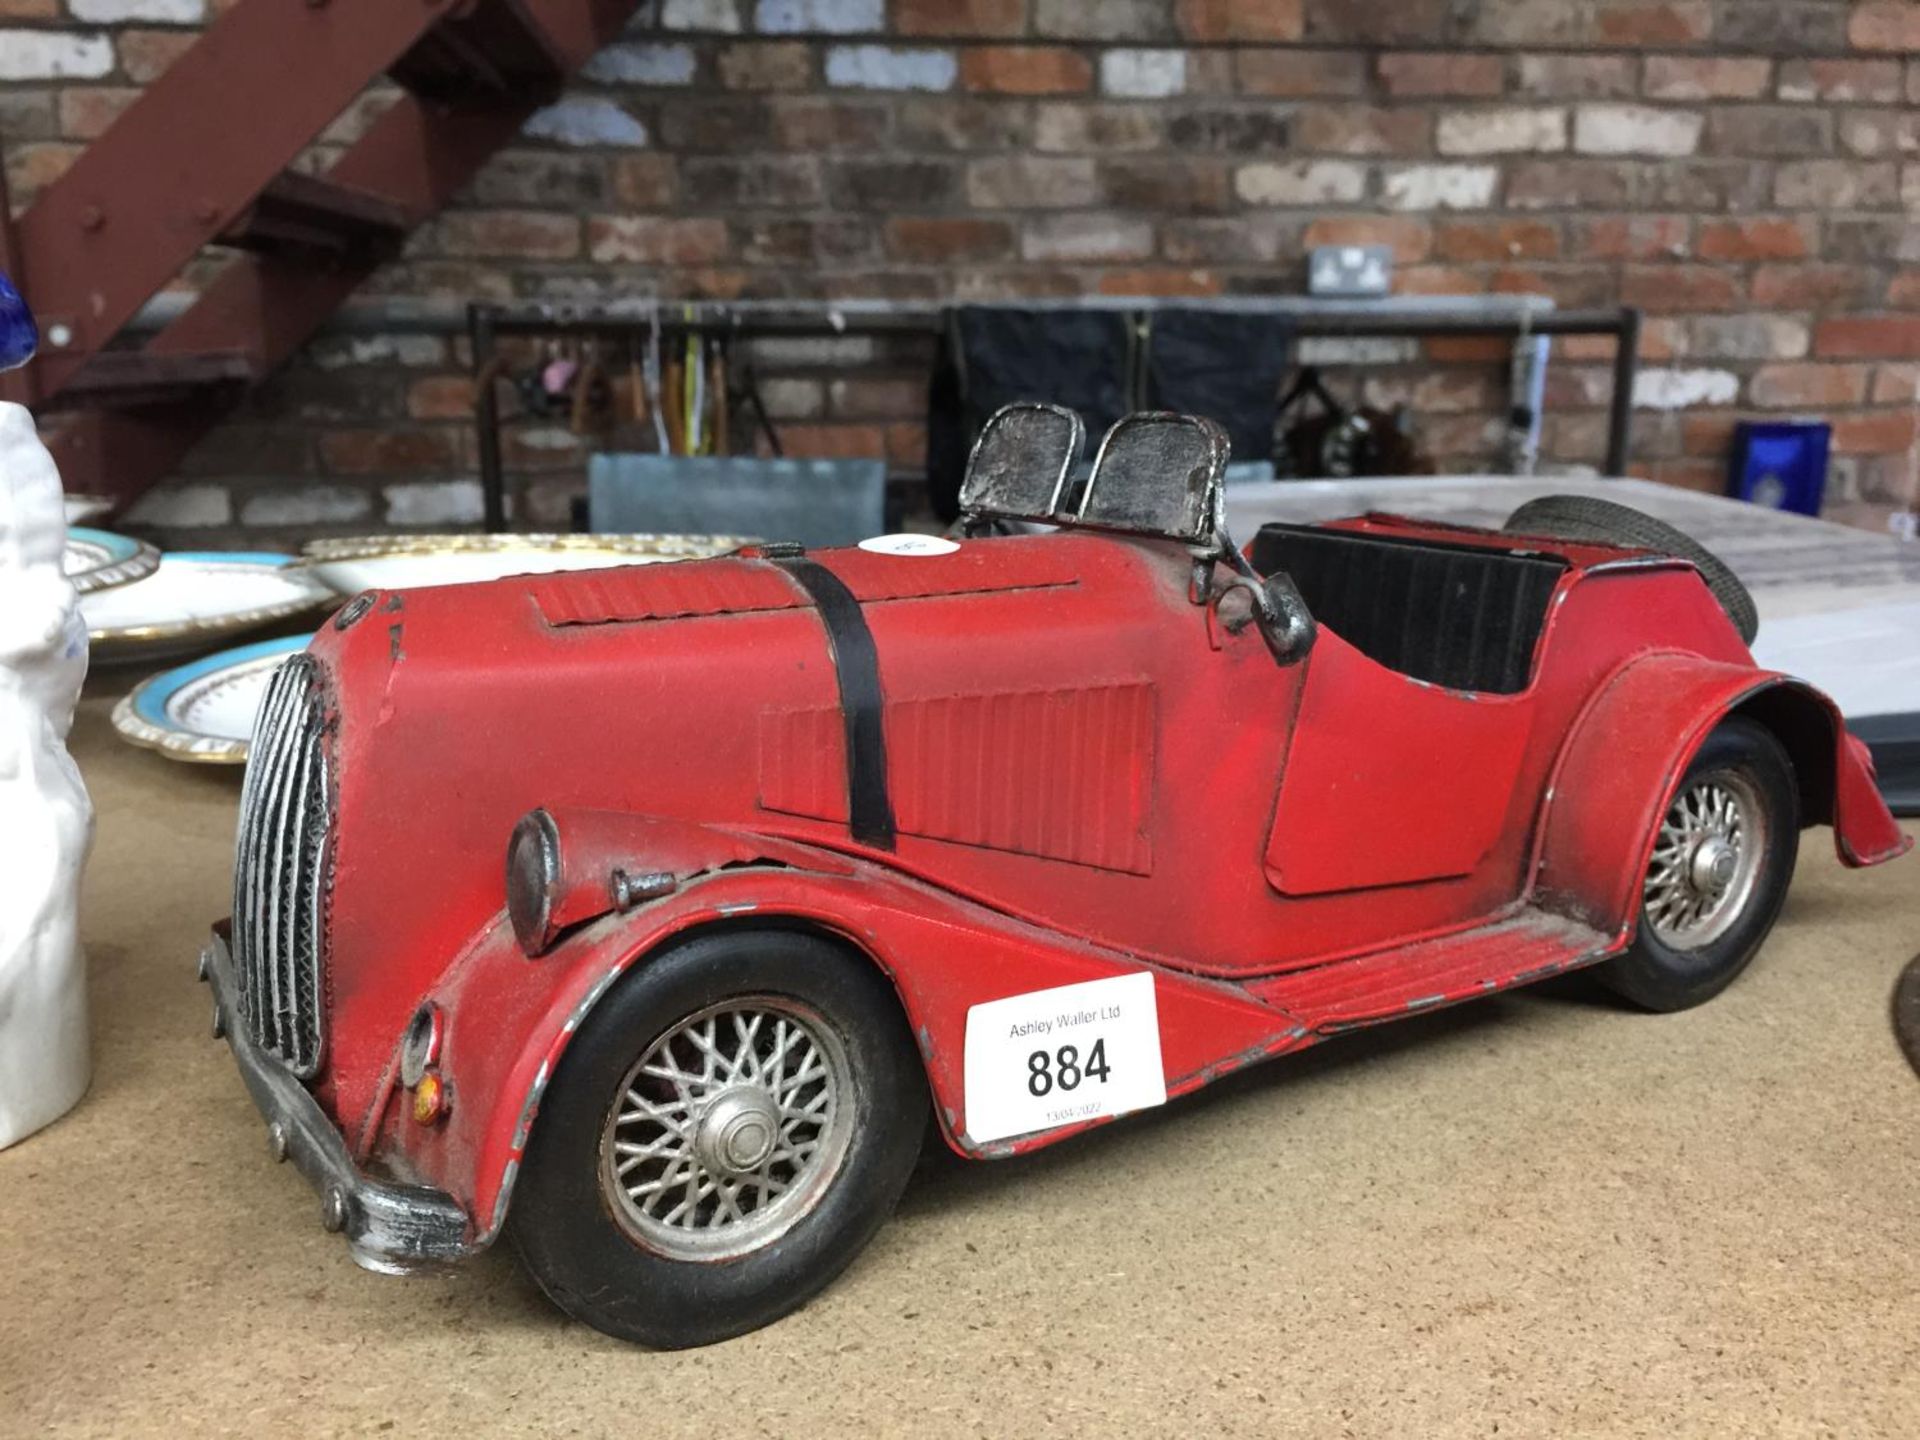 A LARGE MODEL OF A RED MORGAN SPORTS CAR LENGTH 36CM - Image 2 of 4